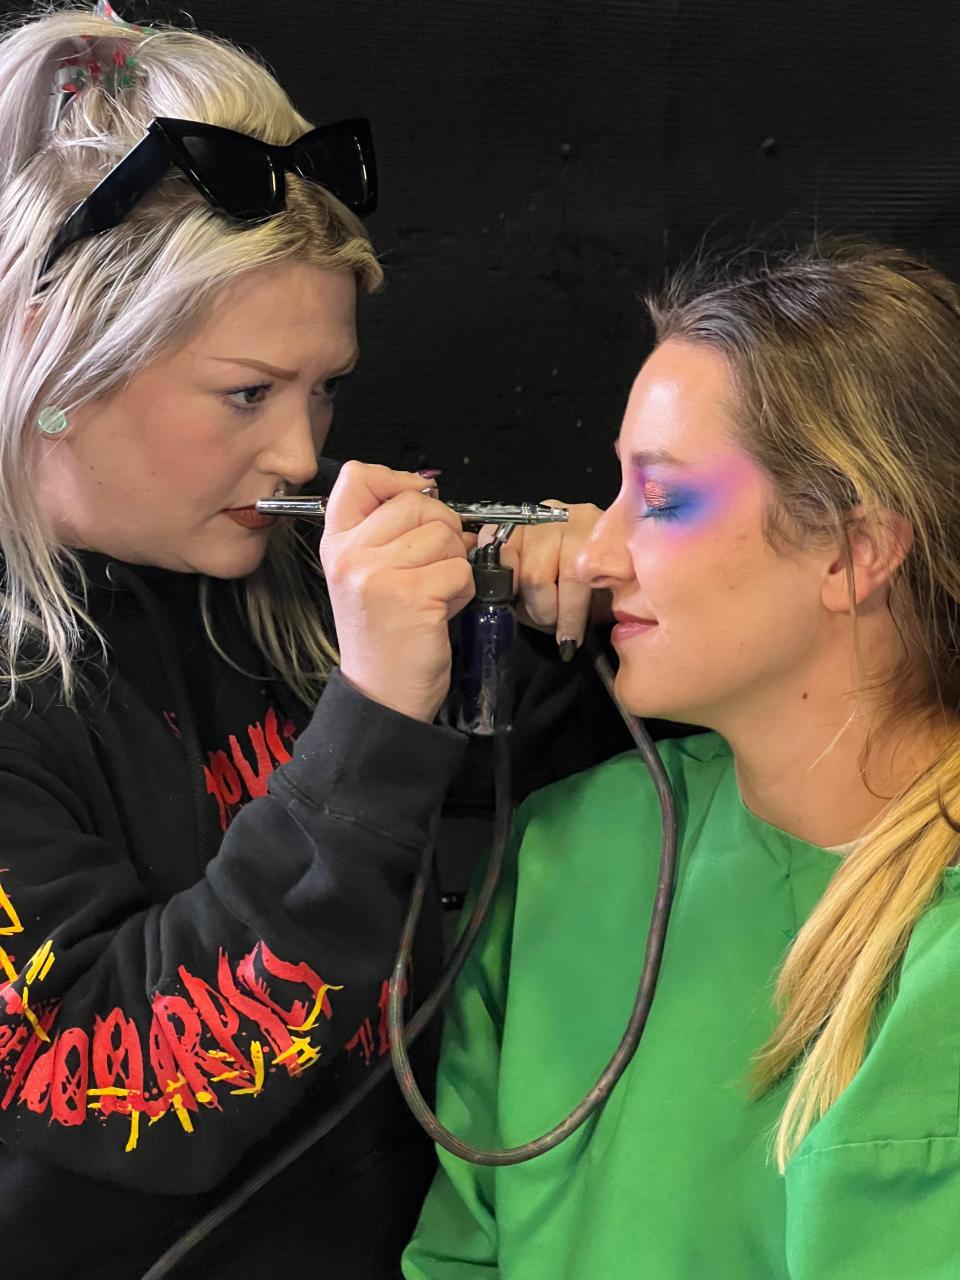 A makeup artist airbrushes a performer before the night's Mardi Gras parade. Hundreds of team members work behind the scenes to produce the months-long event.